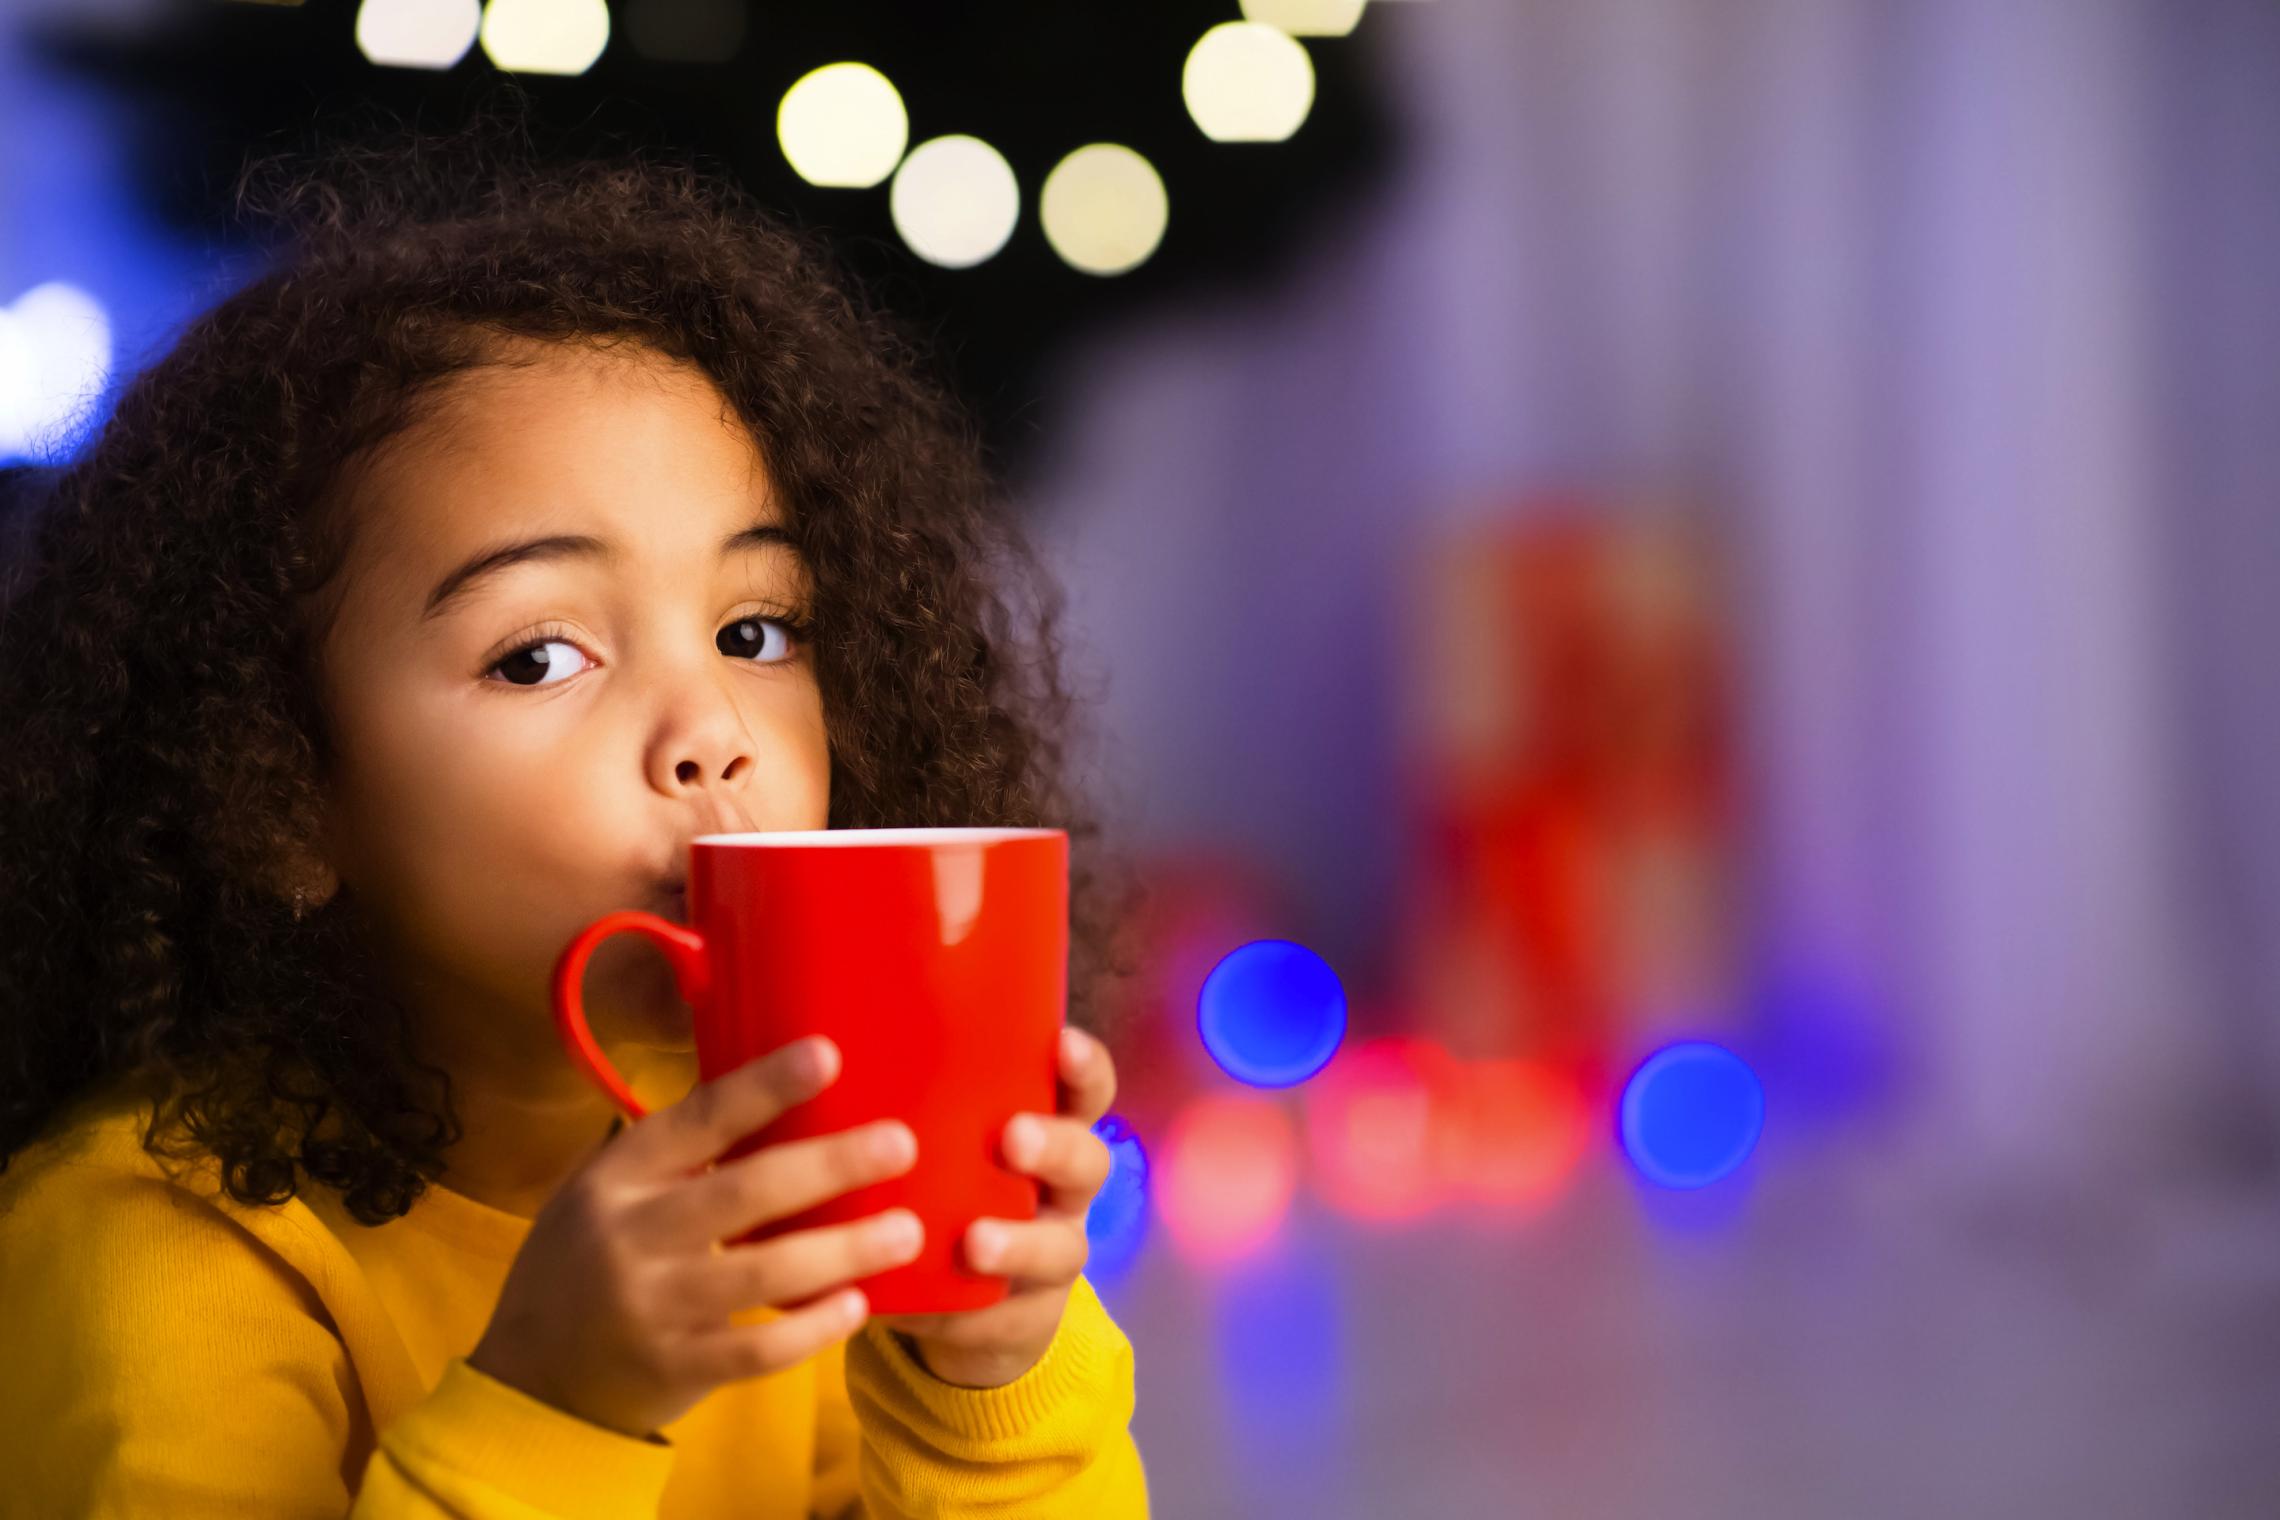 Young child sips hot cocoa in front of holiday lights.